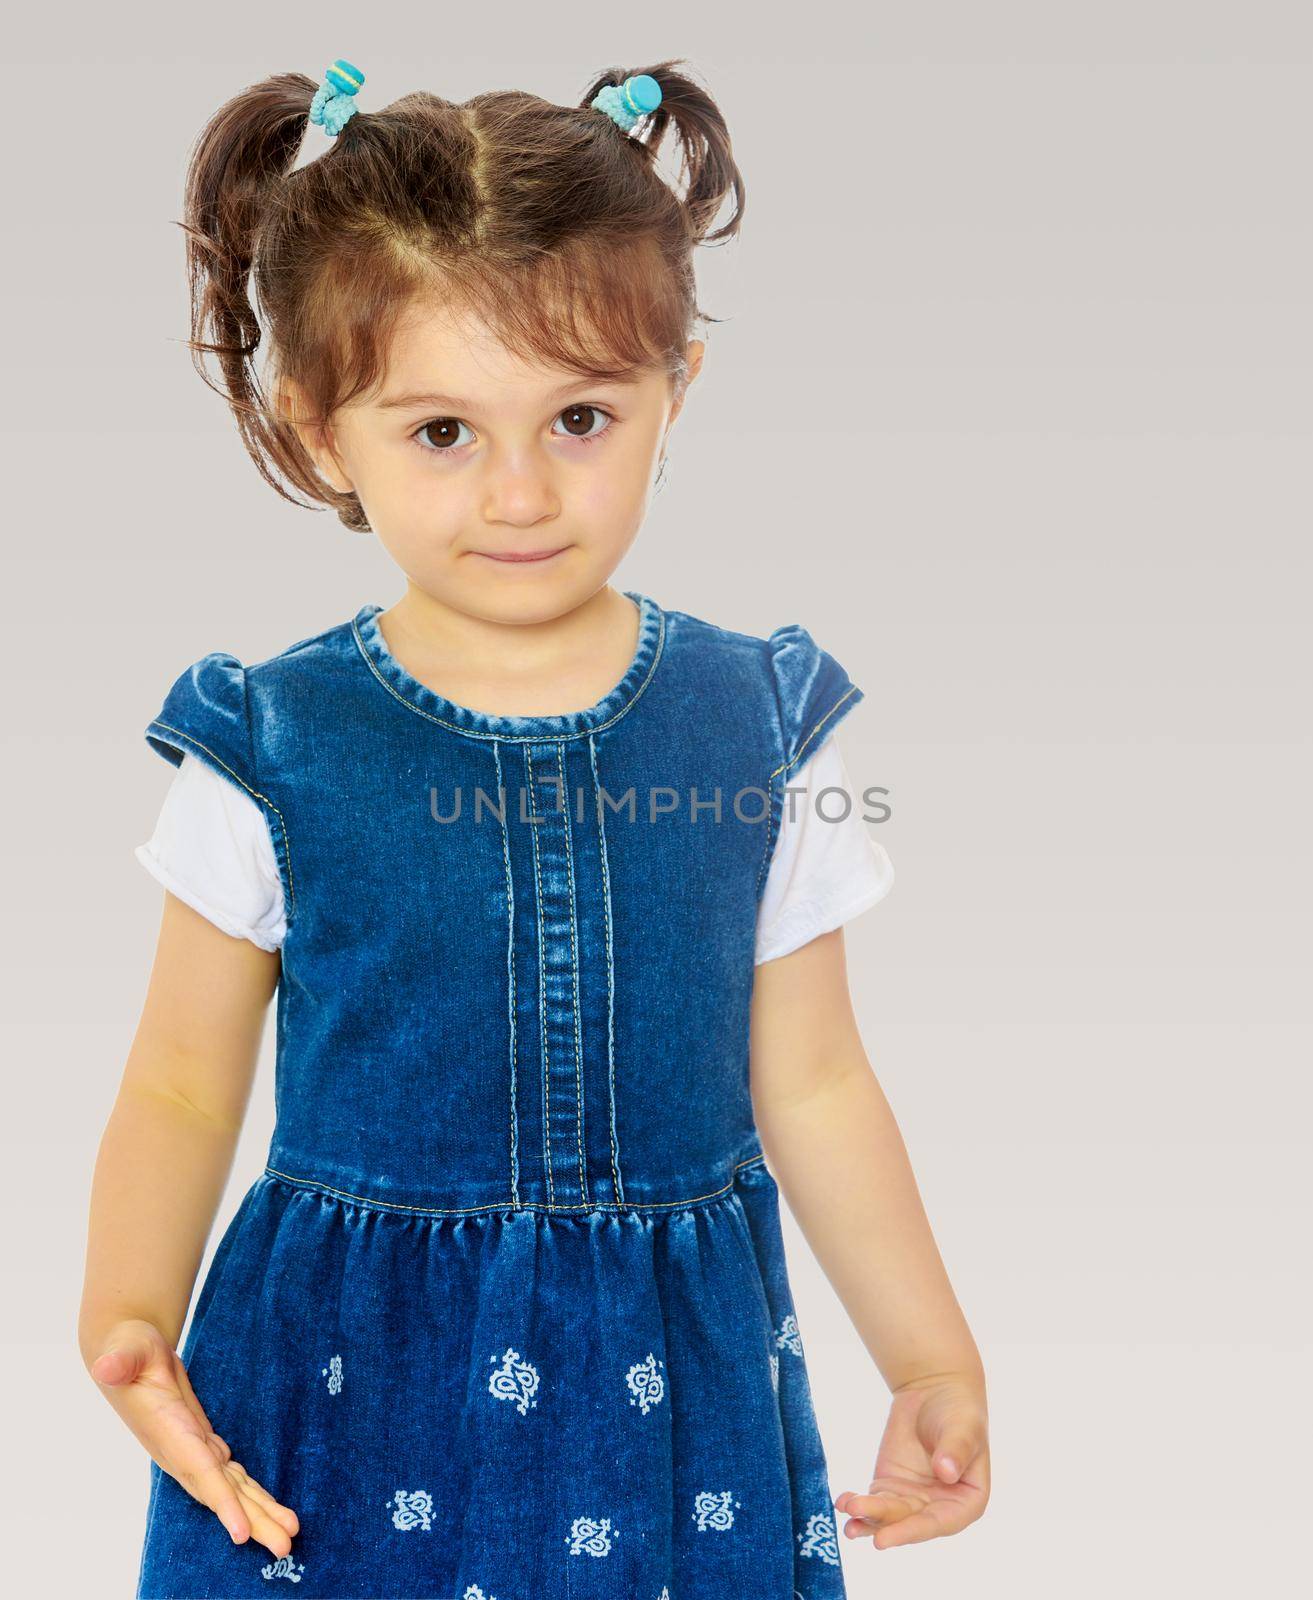 Cute little girl with short pigtails on the head, in a blue dress with short sleeves. Close-up.On a gray background.